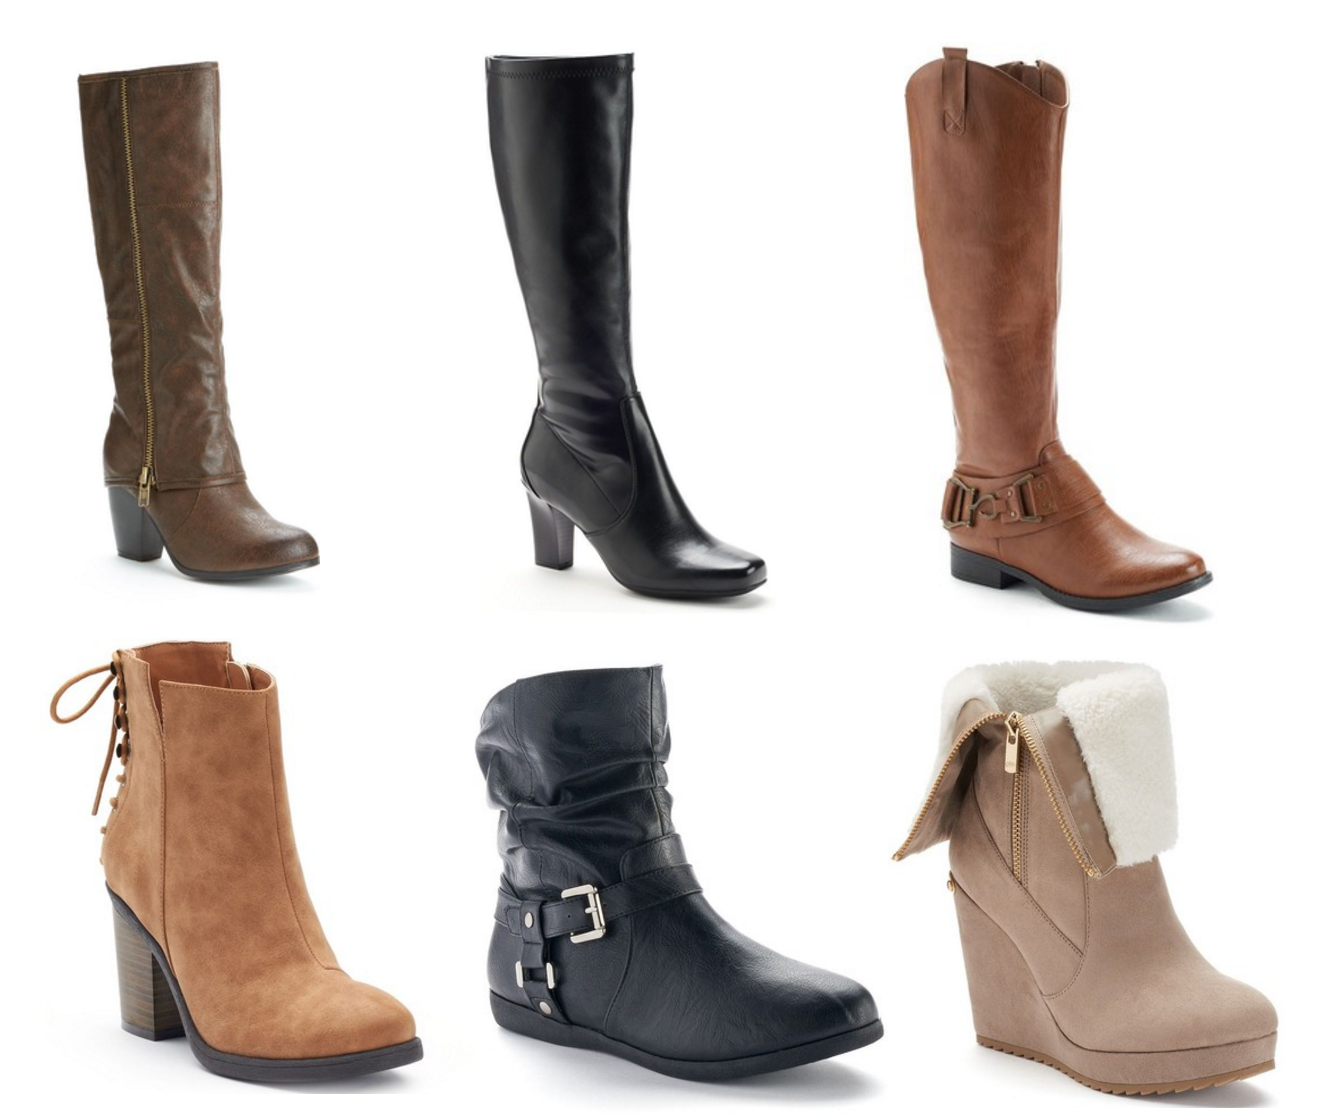 kohl-s-10-off-50-purchase-of-shoes-boots-and-accessories-extra